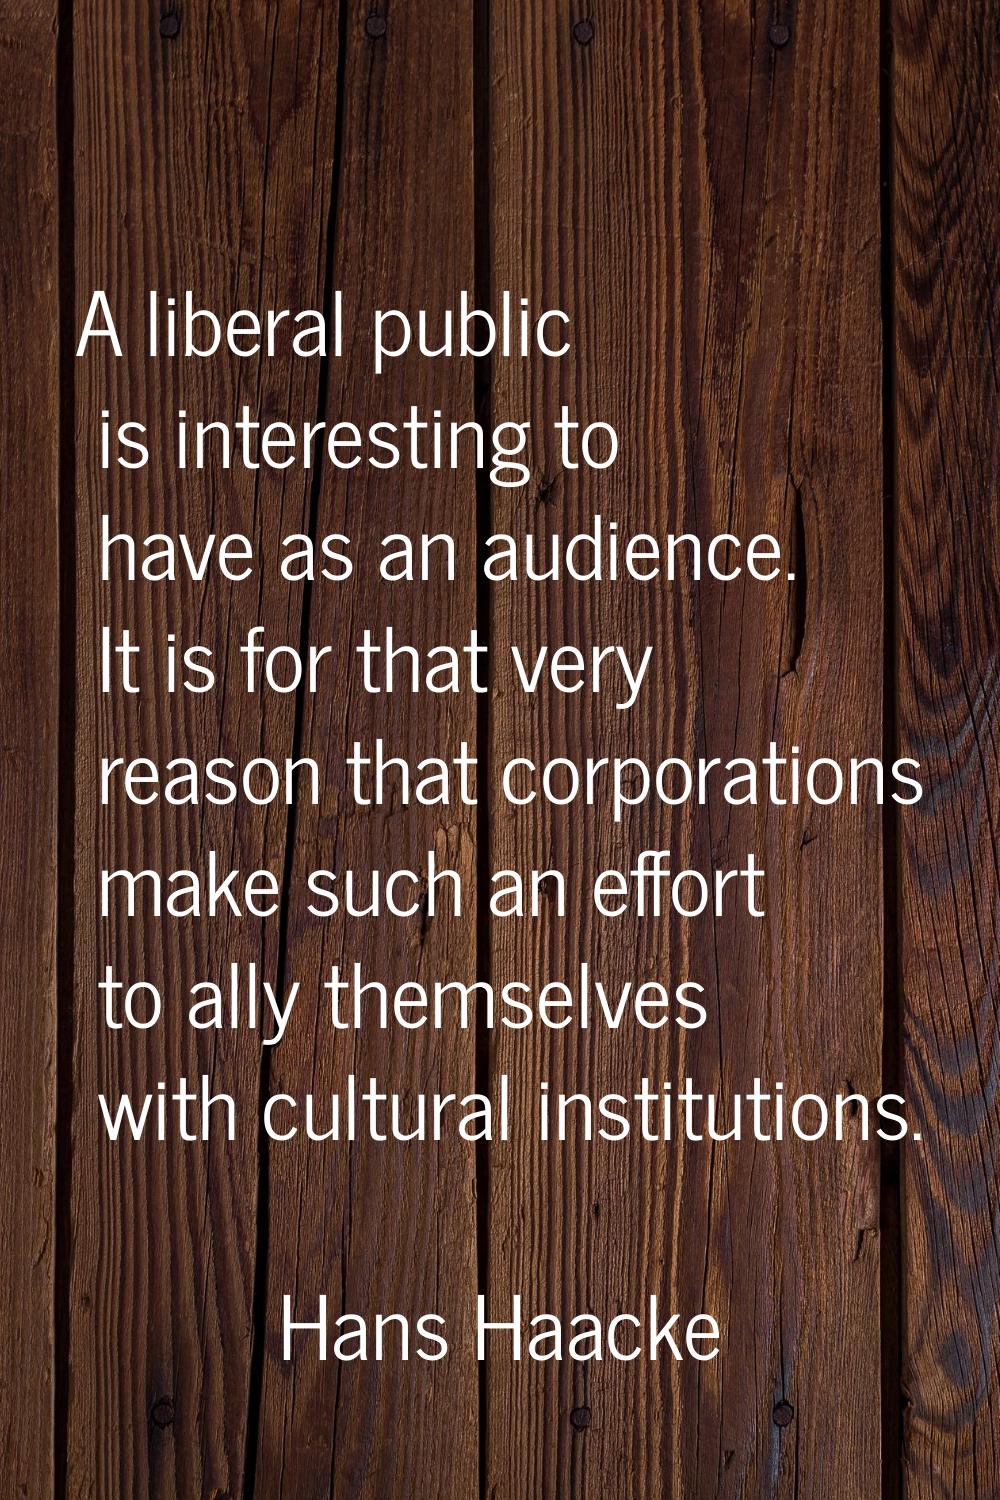 A liberal public is interesting to have as an audience. It is for that very reason that corporation